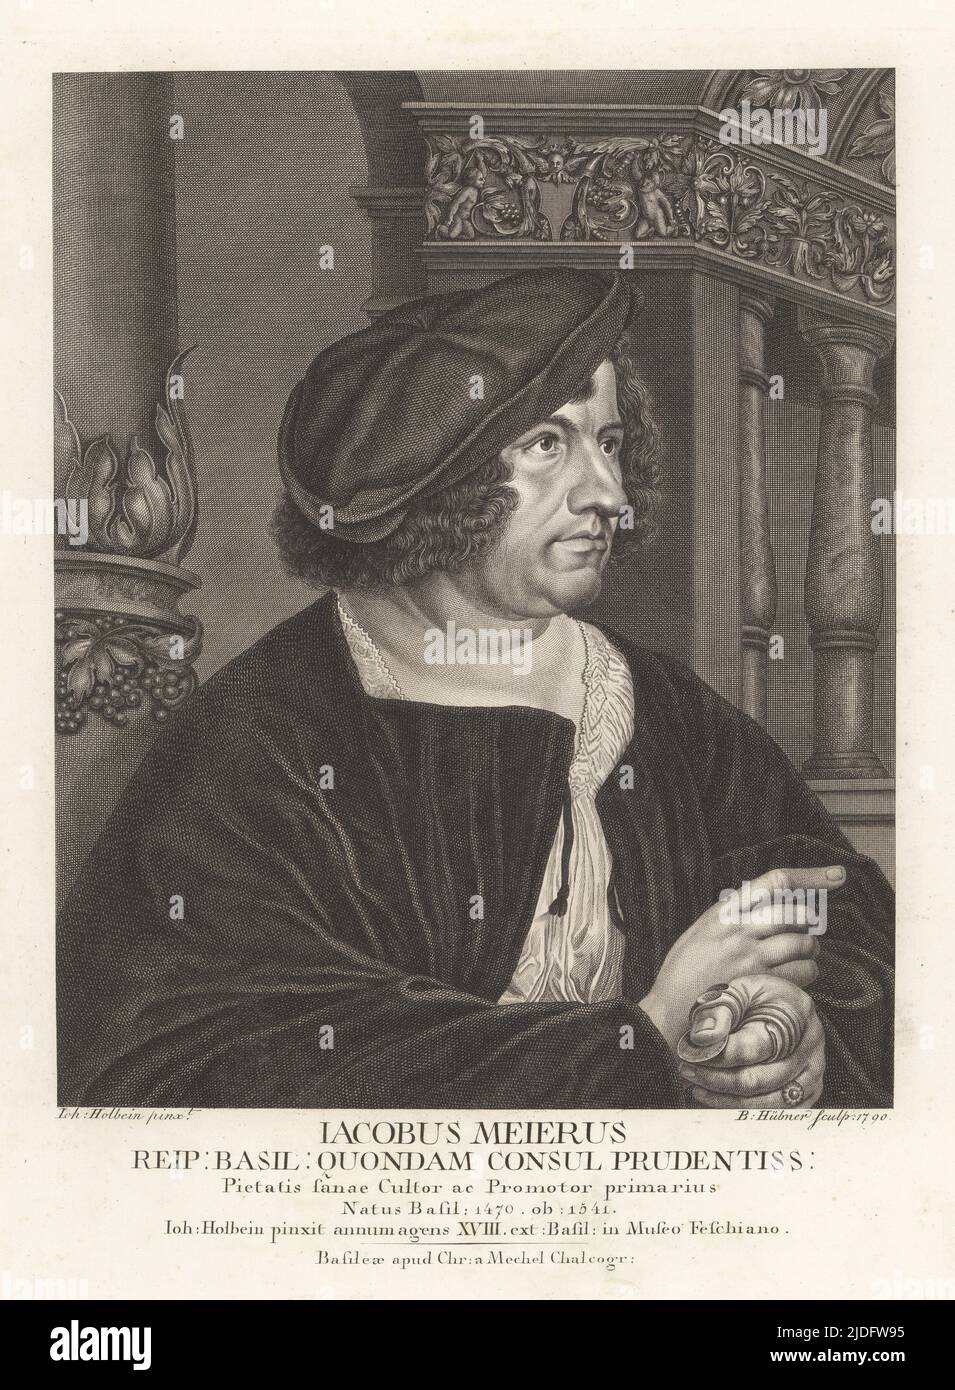 Portrait of Jakob Meyer zum Hasen, money changer and burgermeister of Basel, 1482-1531. Iacobus Meierus, Reip: Basil: Quondam Consul Prudentiss. Copperplate engraving by Bartholomaus Hubner after a portrait by Hans Holbein in Christian von Mechel's Oeuvre de Jean Holbein, Chez Guillaume Haas, Basel, 1790. Stock Photo